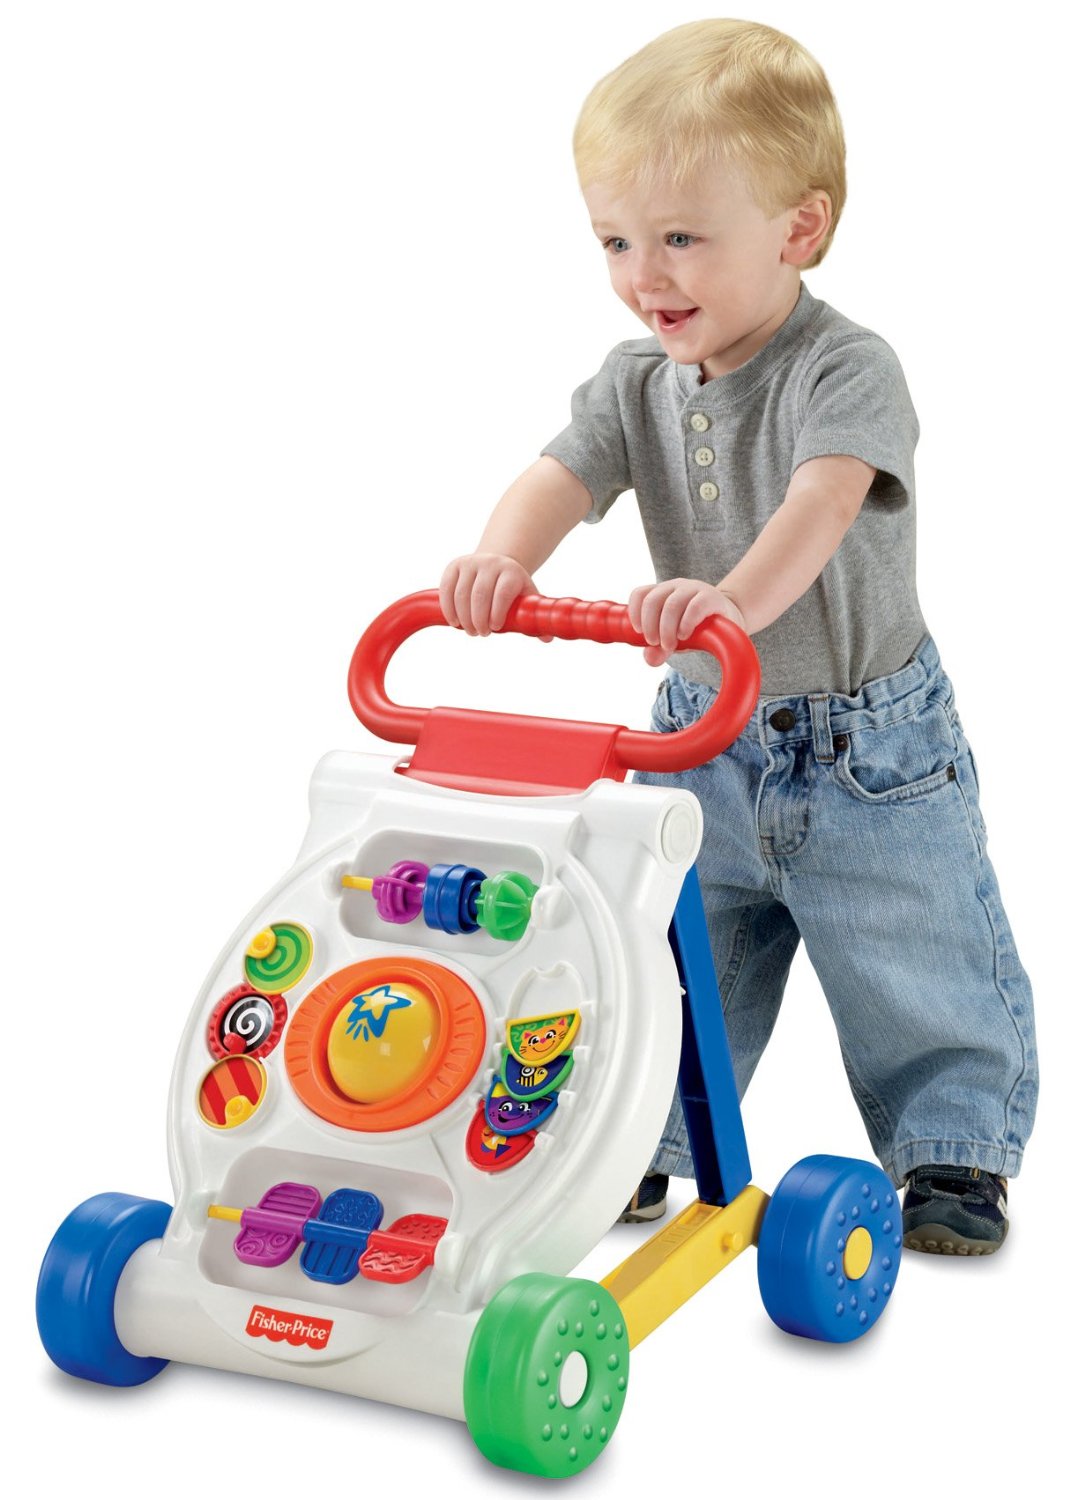 baby toy to help walk